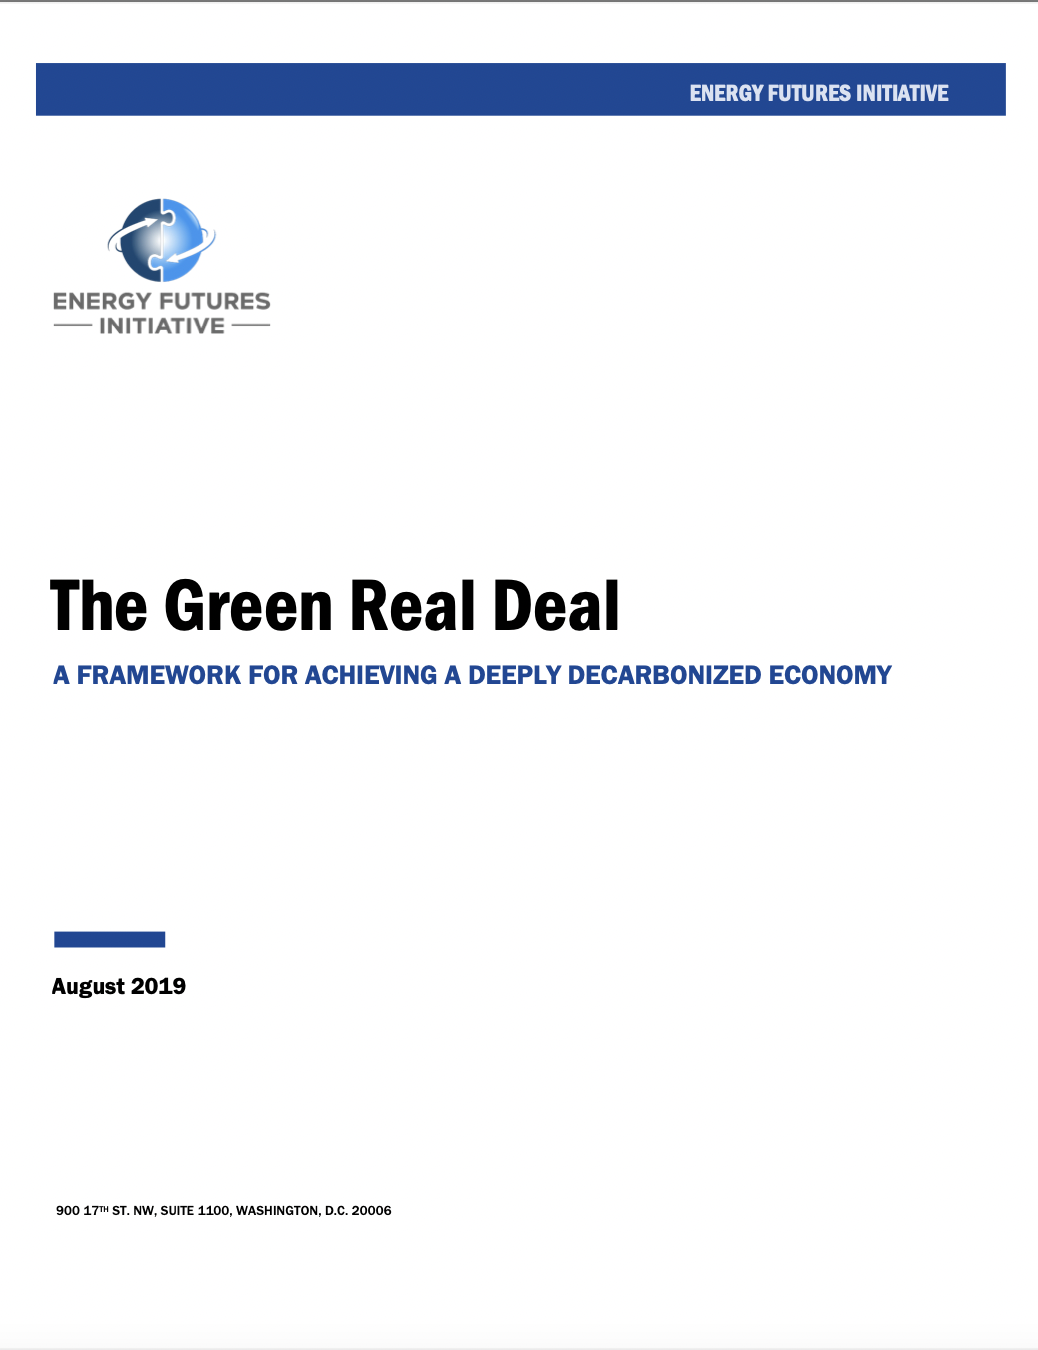 Green Real Deal report cover.